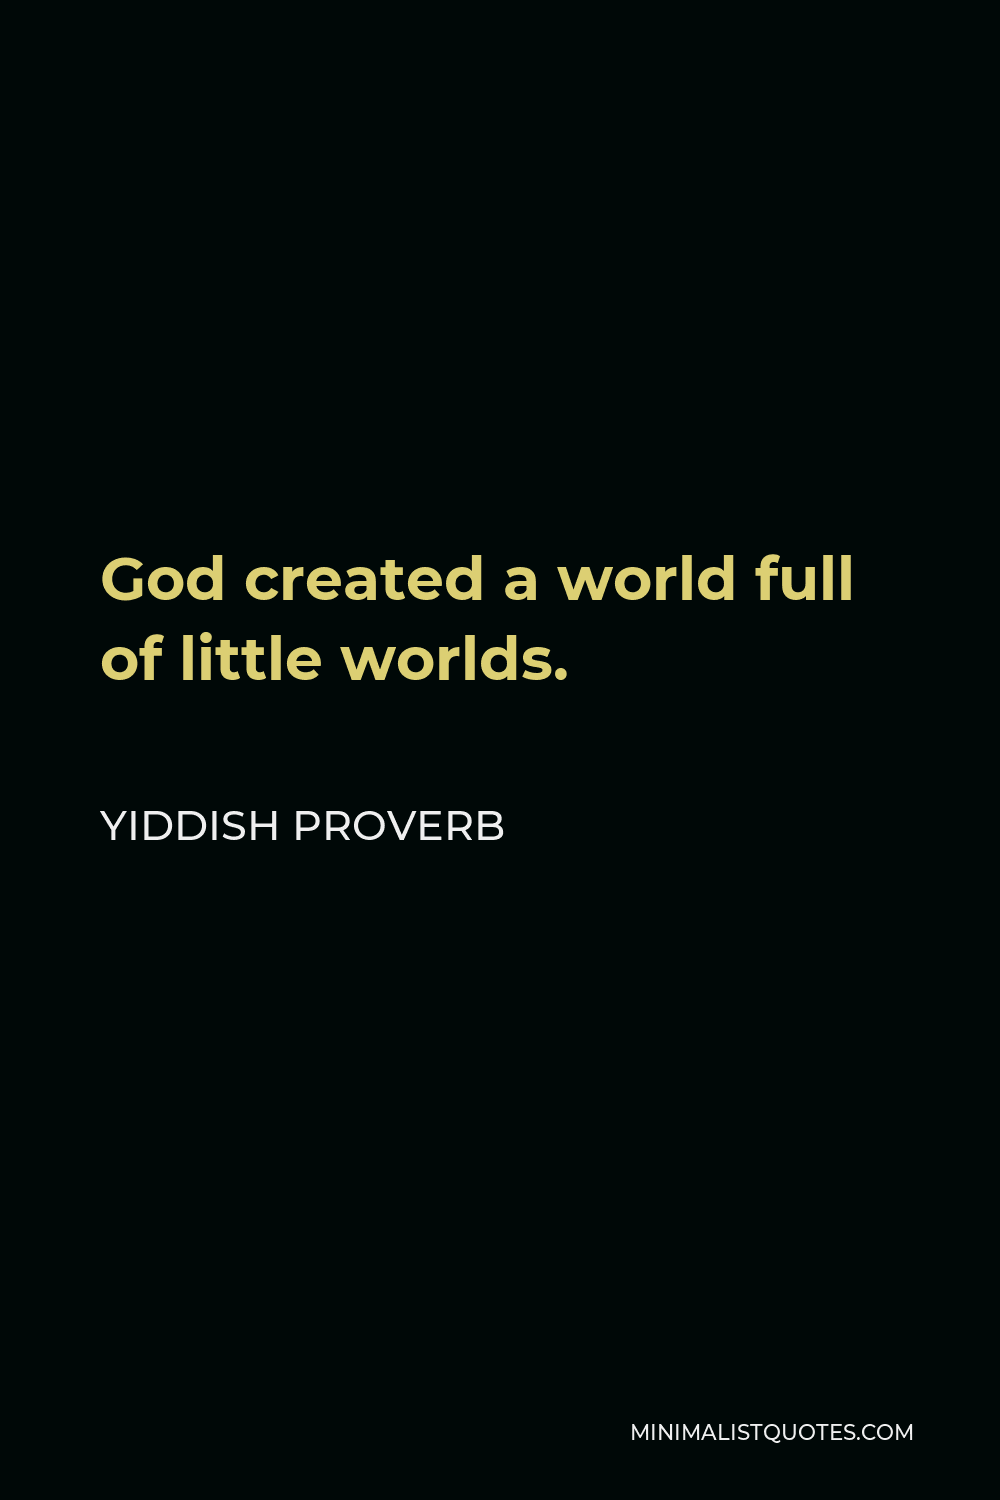 Yiddish Proverb Quote - God created a world full of little worlds.